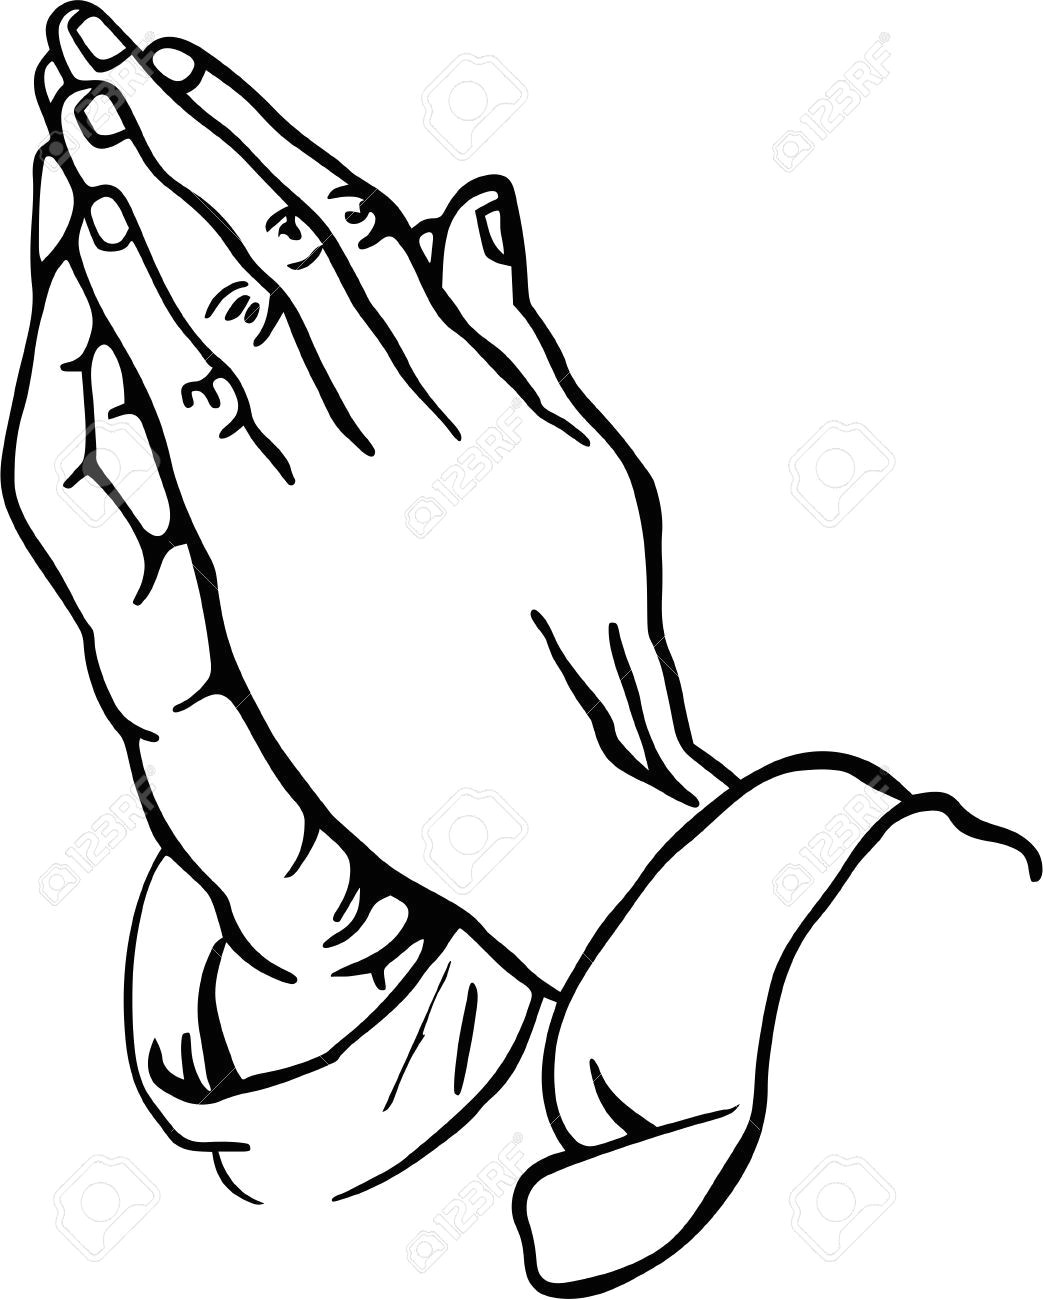 Drawings Of Hands In Prayer Praying Hands Clipart Prints Svg S Board 2 Praying Hands